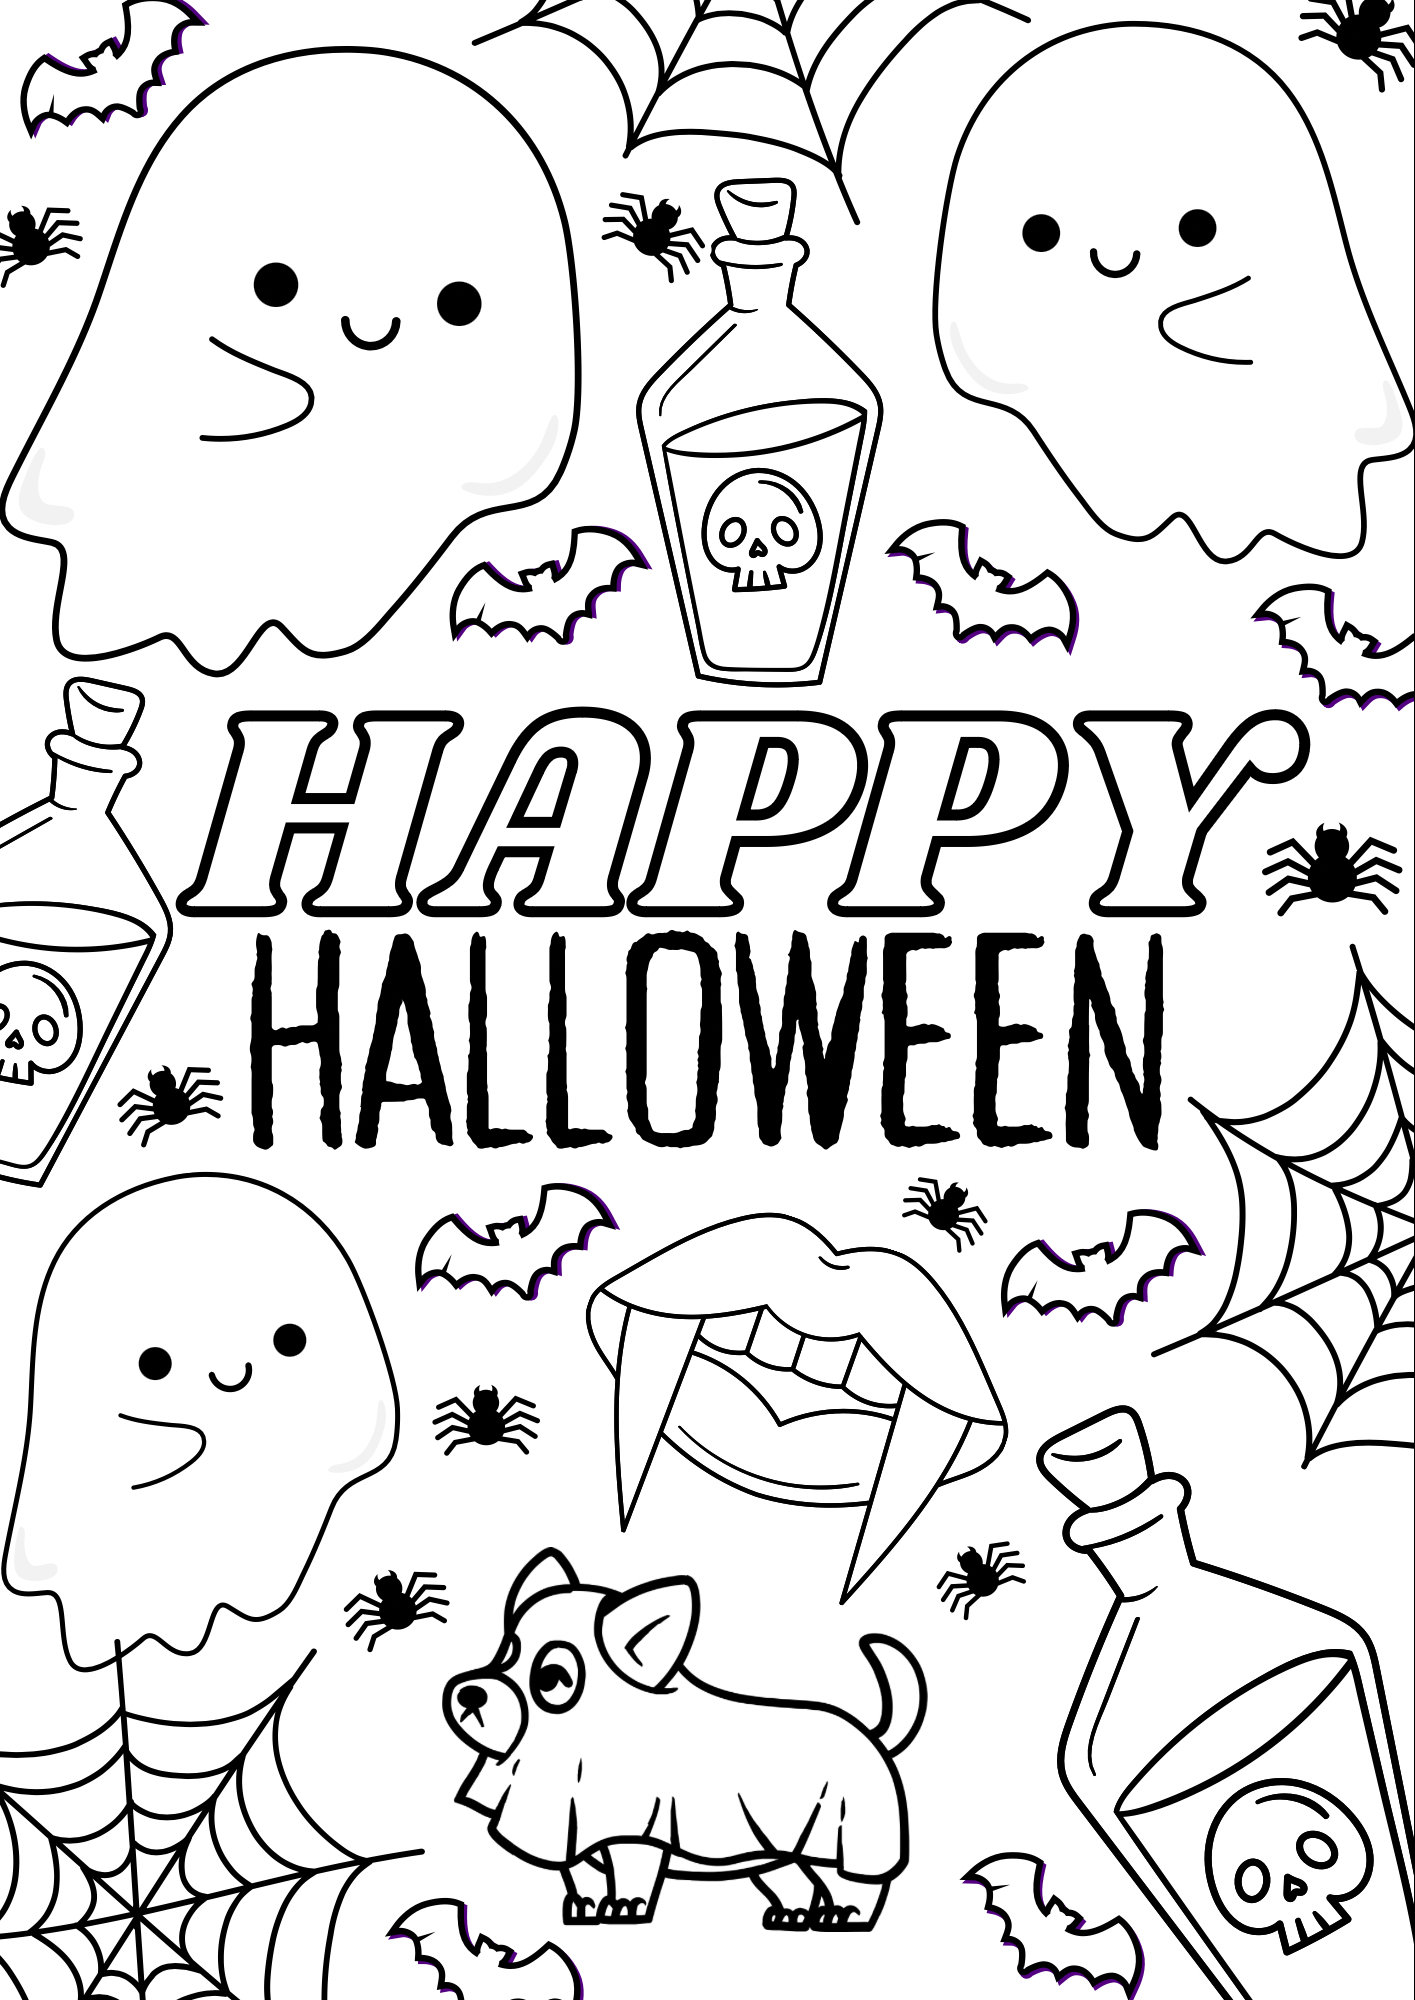 Halloween Colouring Pages Printable - Etsy